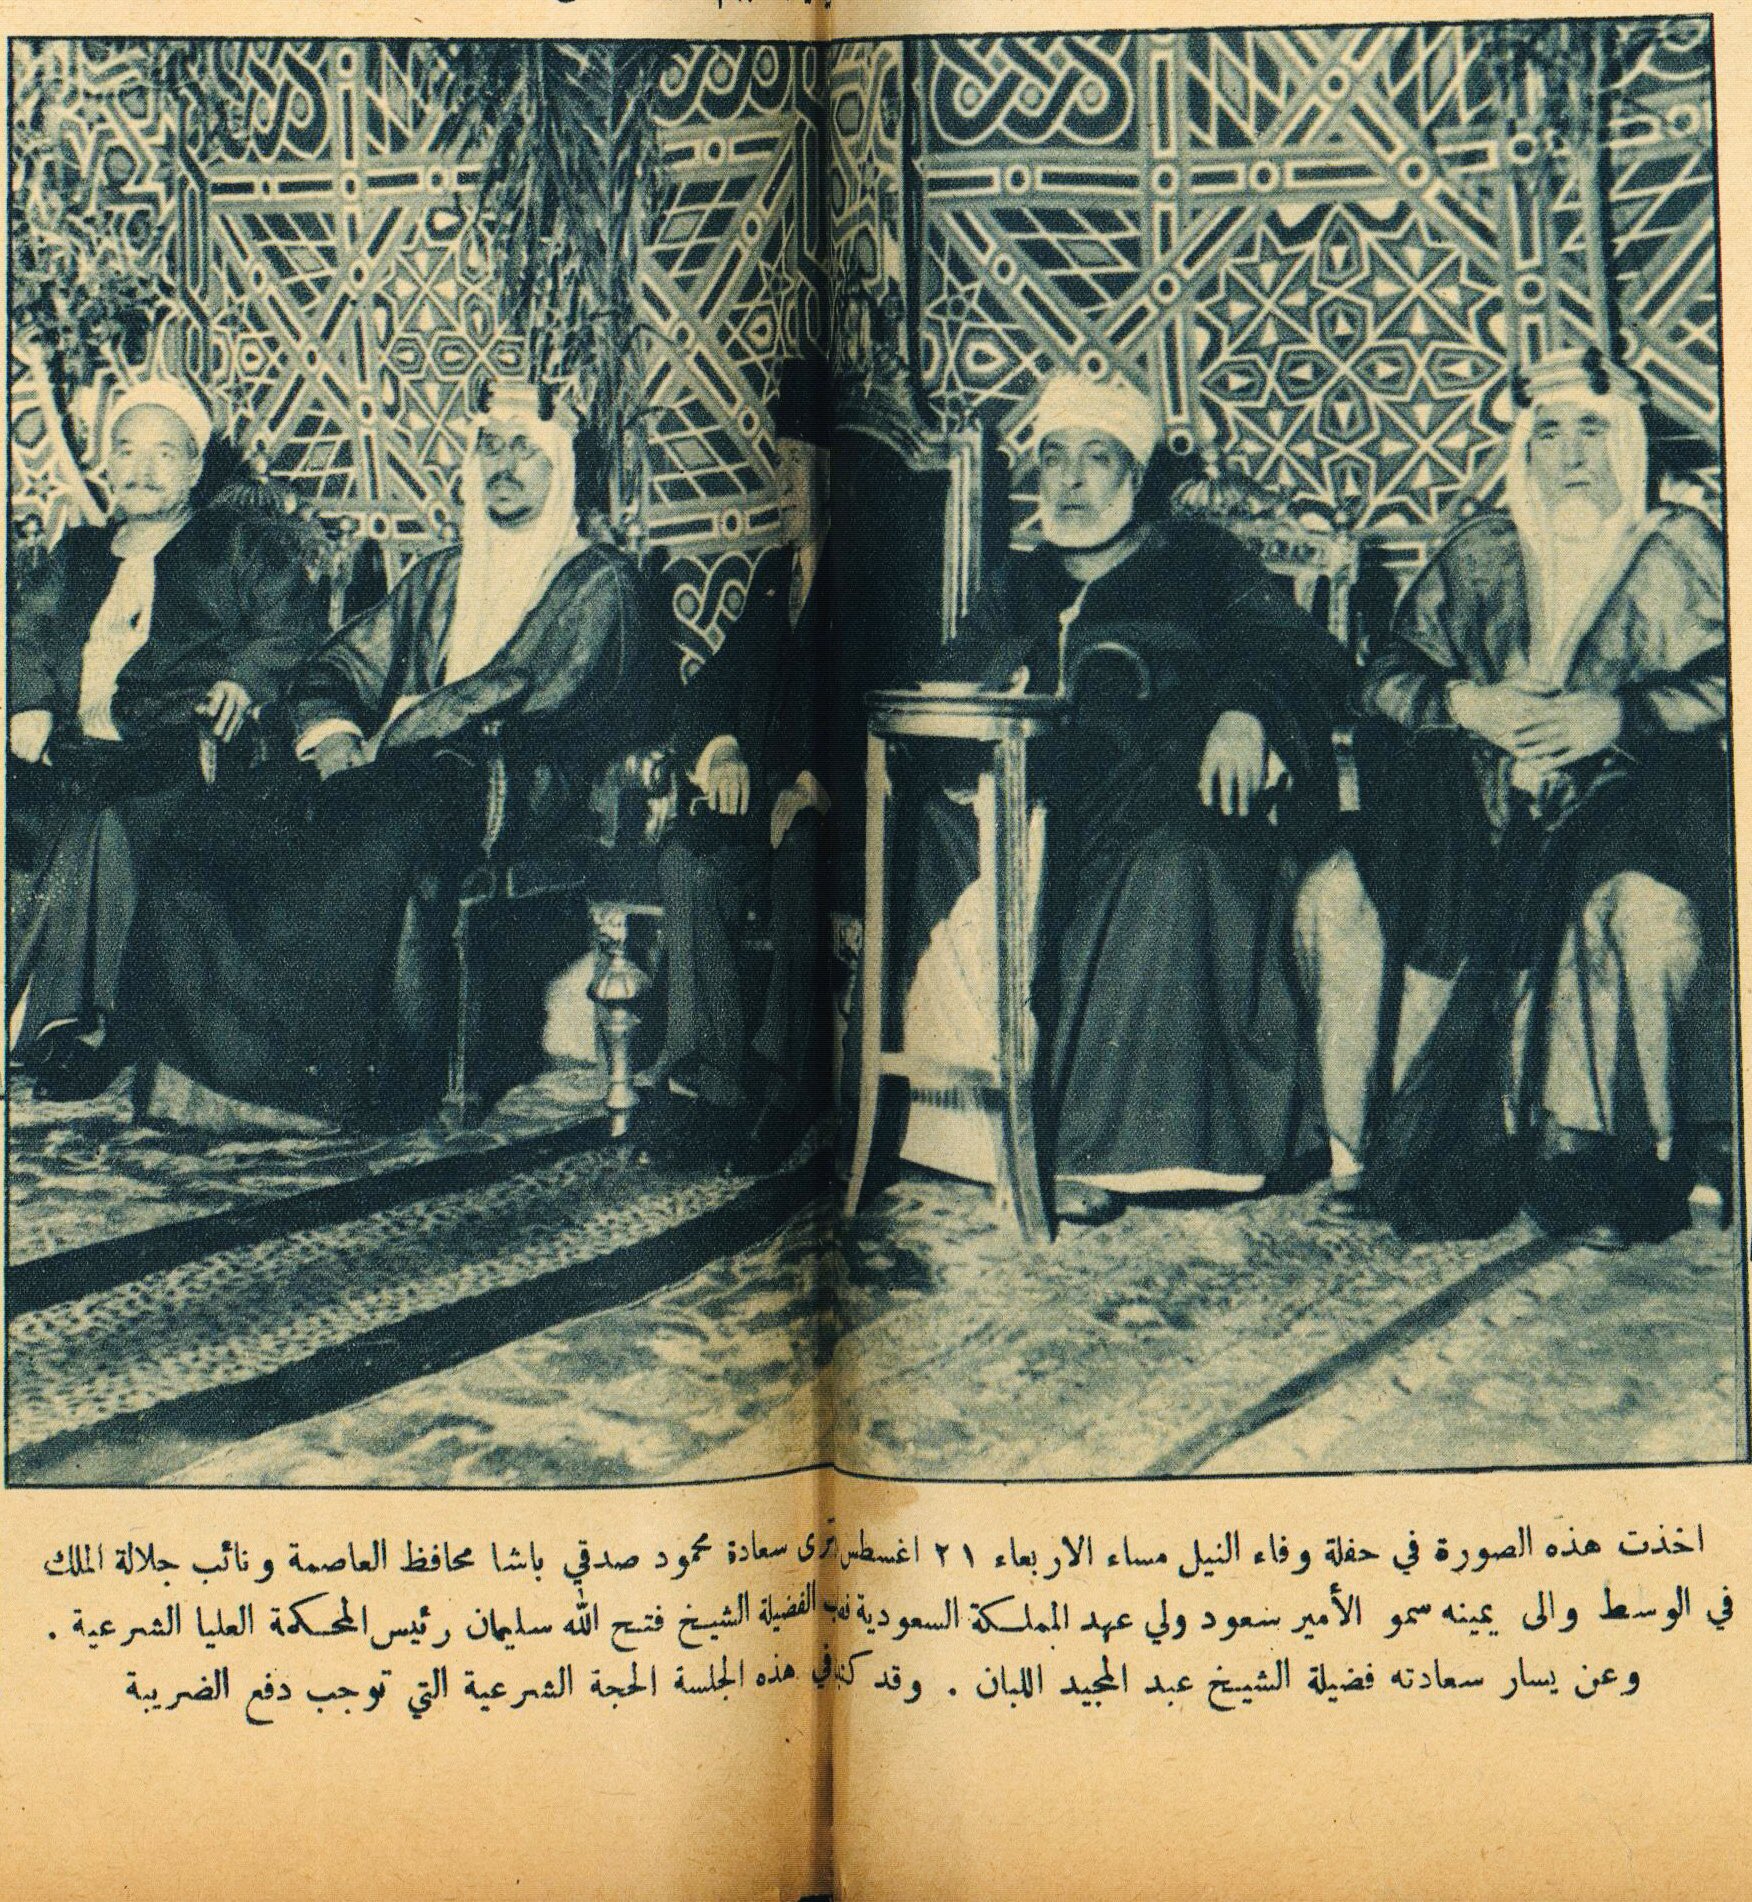 In the middle, His Excellency Mahmoud Sidqi Pasha, the representative of His Majesty the King and to his right Crown Prince Saud and the Sheikh Fathullah Sulaiman and to his left Sidqi Pasha and Sheikh Abdul Majeed Al Labban